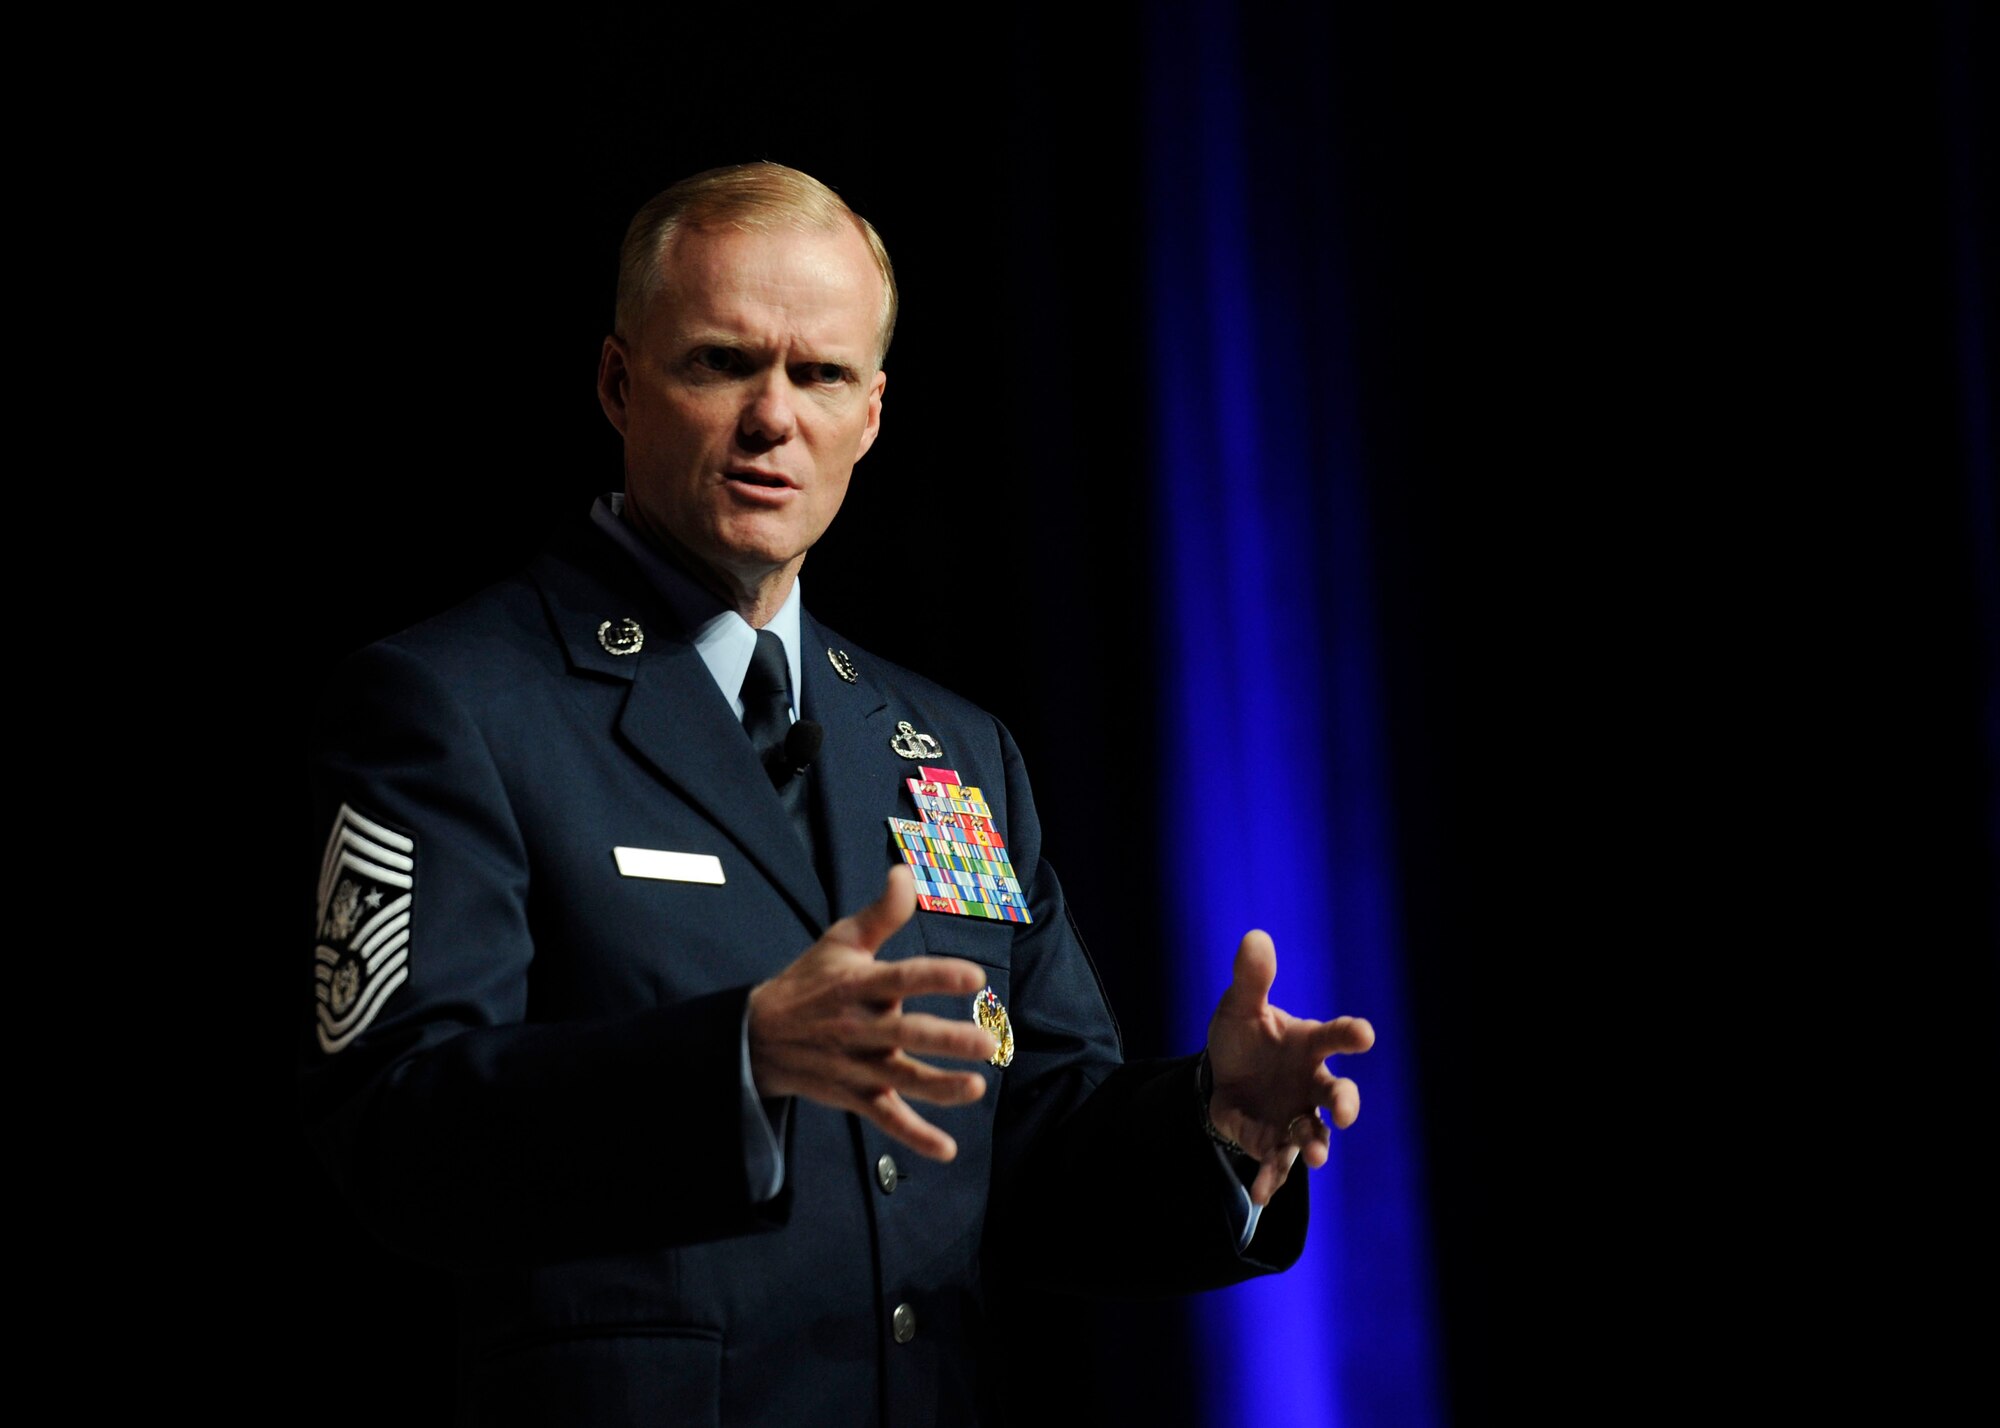 Chief Master Sgt. of the Air Force James A. Cody presents his enlisted perspective on developing Airmen at the Air Force Association’s 2013 Air & Space Conference and Technology Exposition Sept. 18, 2013, in Washington, D.C. Cody said creating a healthy work-life balance by encouraging ways to relieve stress and connect with each other is going to ensure the Air Force retains quality Airmen. Cody’s role is to provide direction for the Air Force enlisted corps and represent their interests to those in all levels of government. (U.S Air Force photo/Airman 1st Class Nesha Humes)
